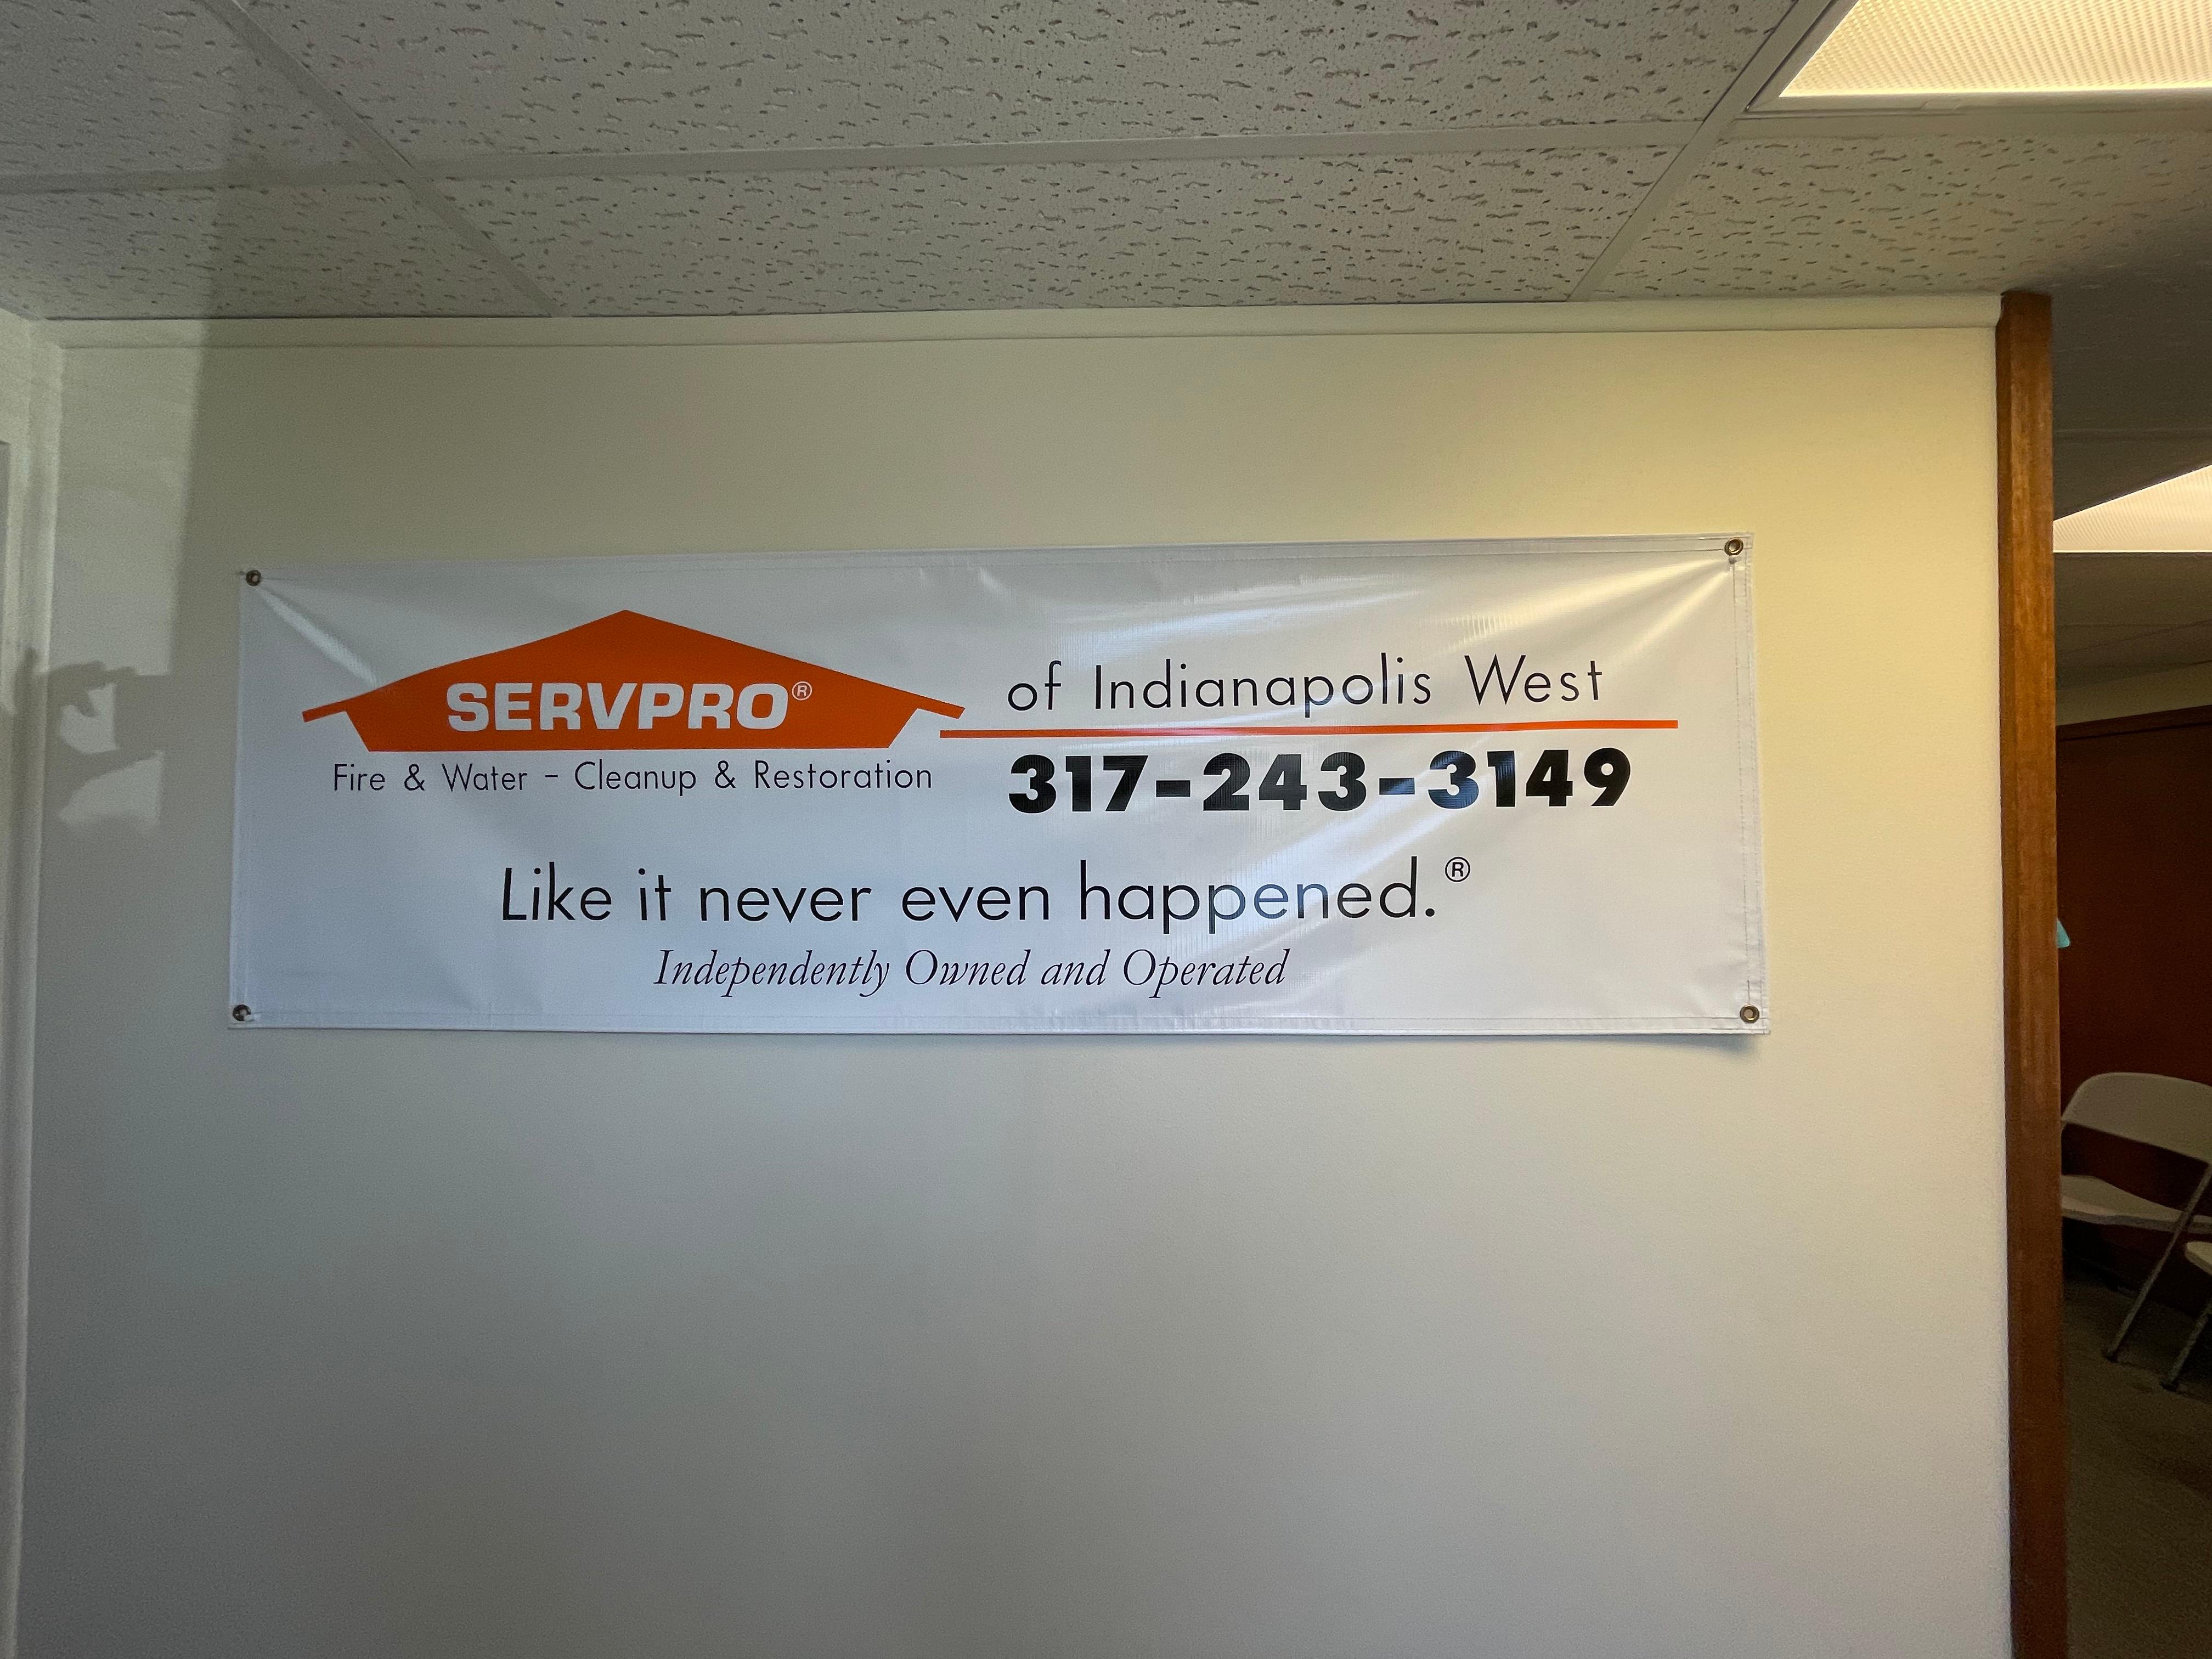 SERVPRO® Fire & Water Damage Cleanup and Restoration. Like it never even happened